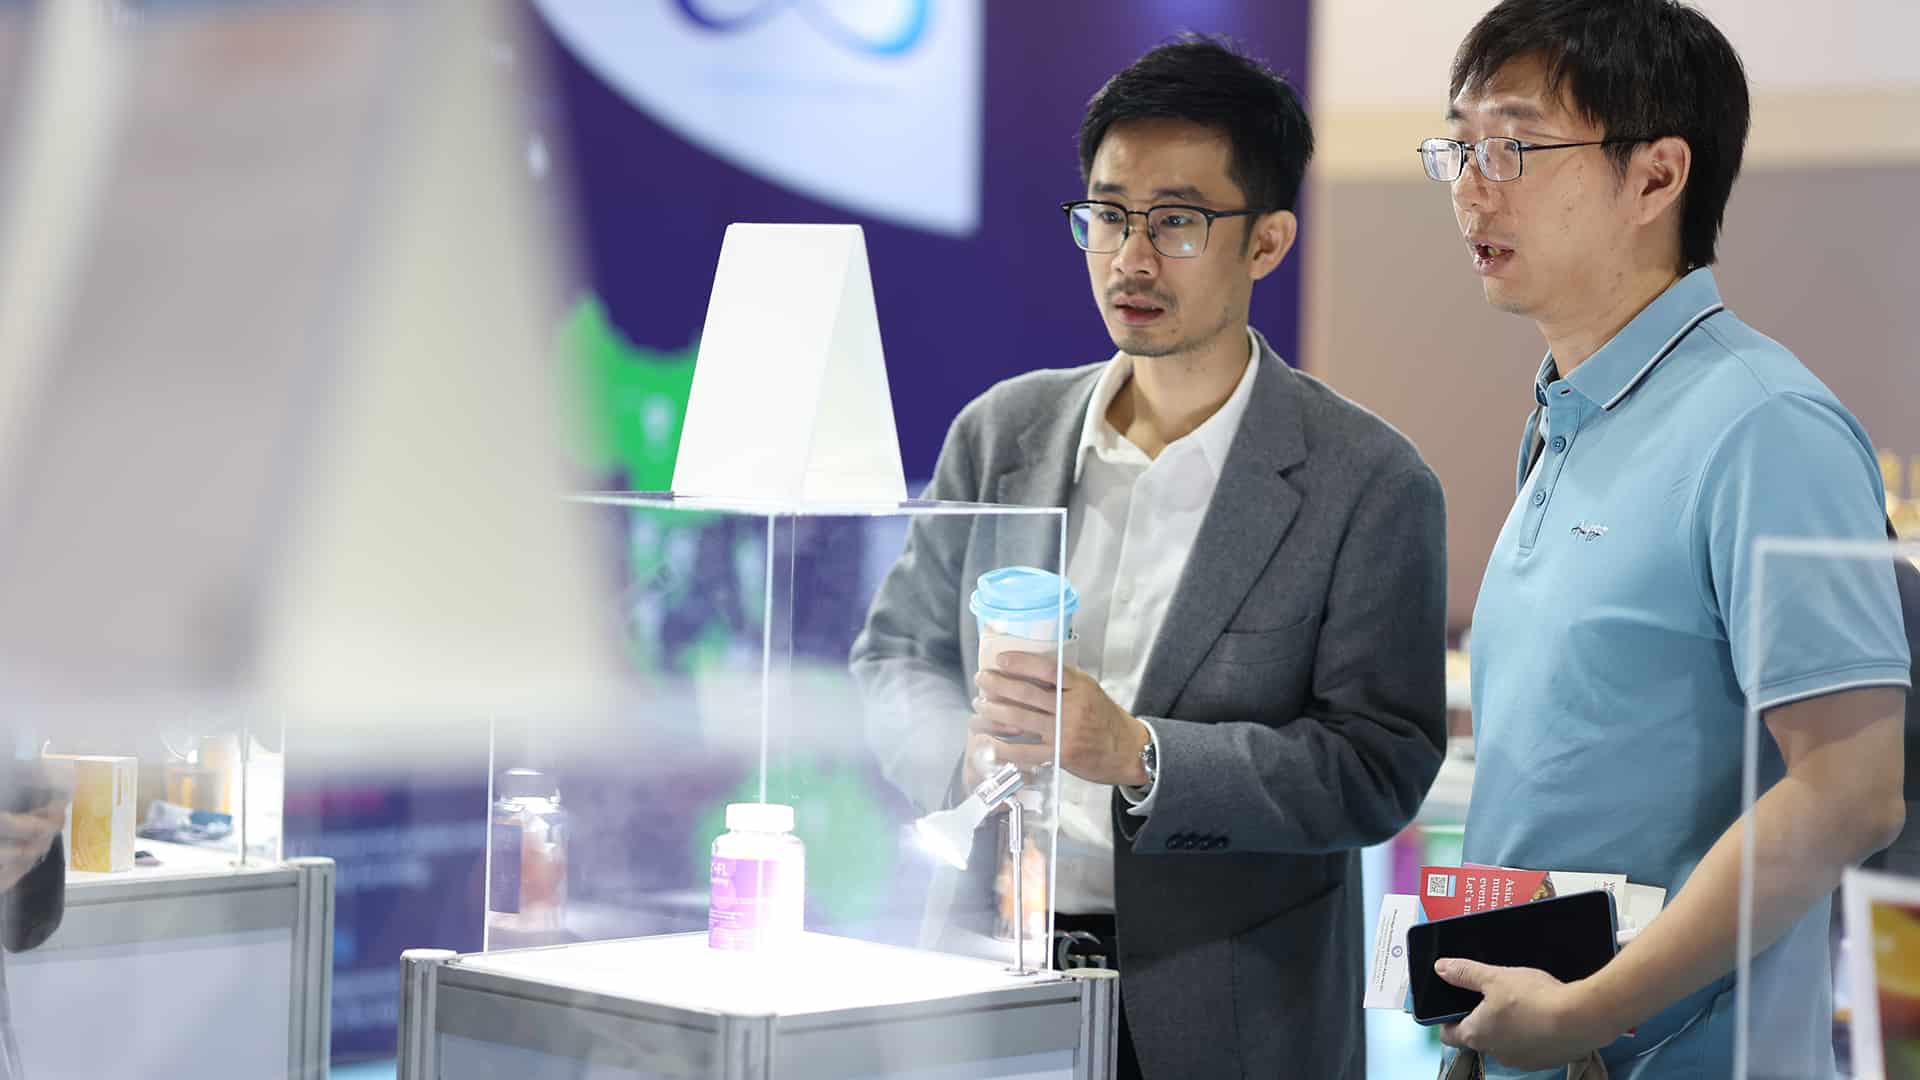 Two attendees at Vitafood Asia attentively looking at a booth